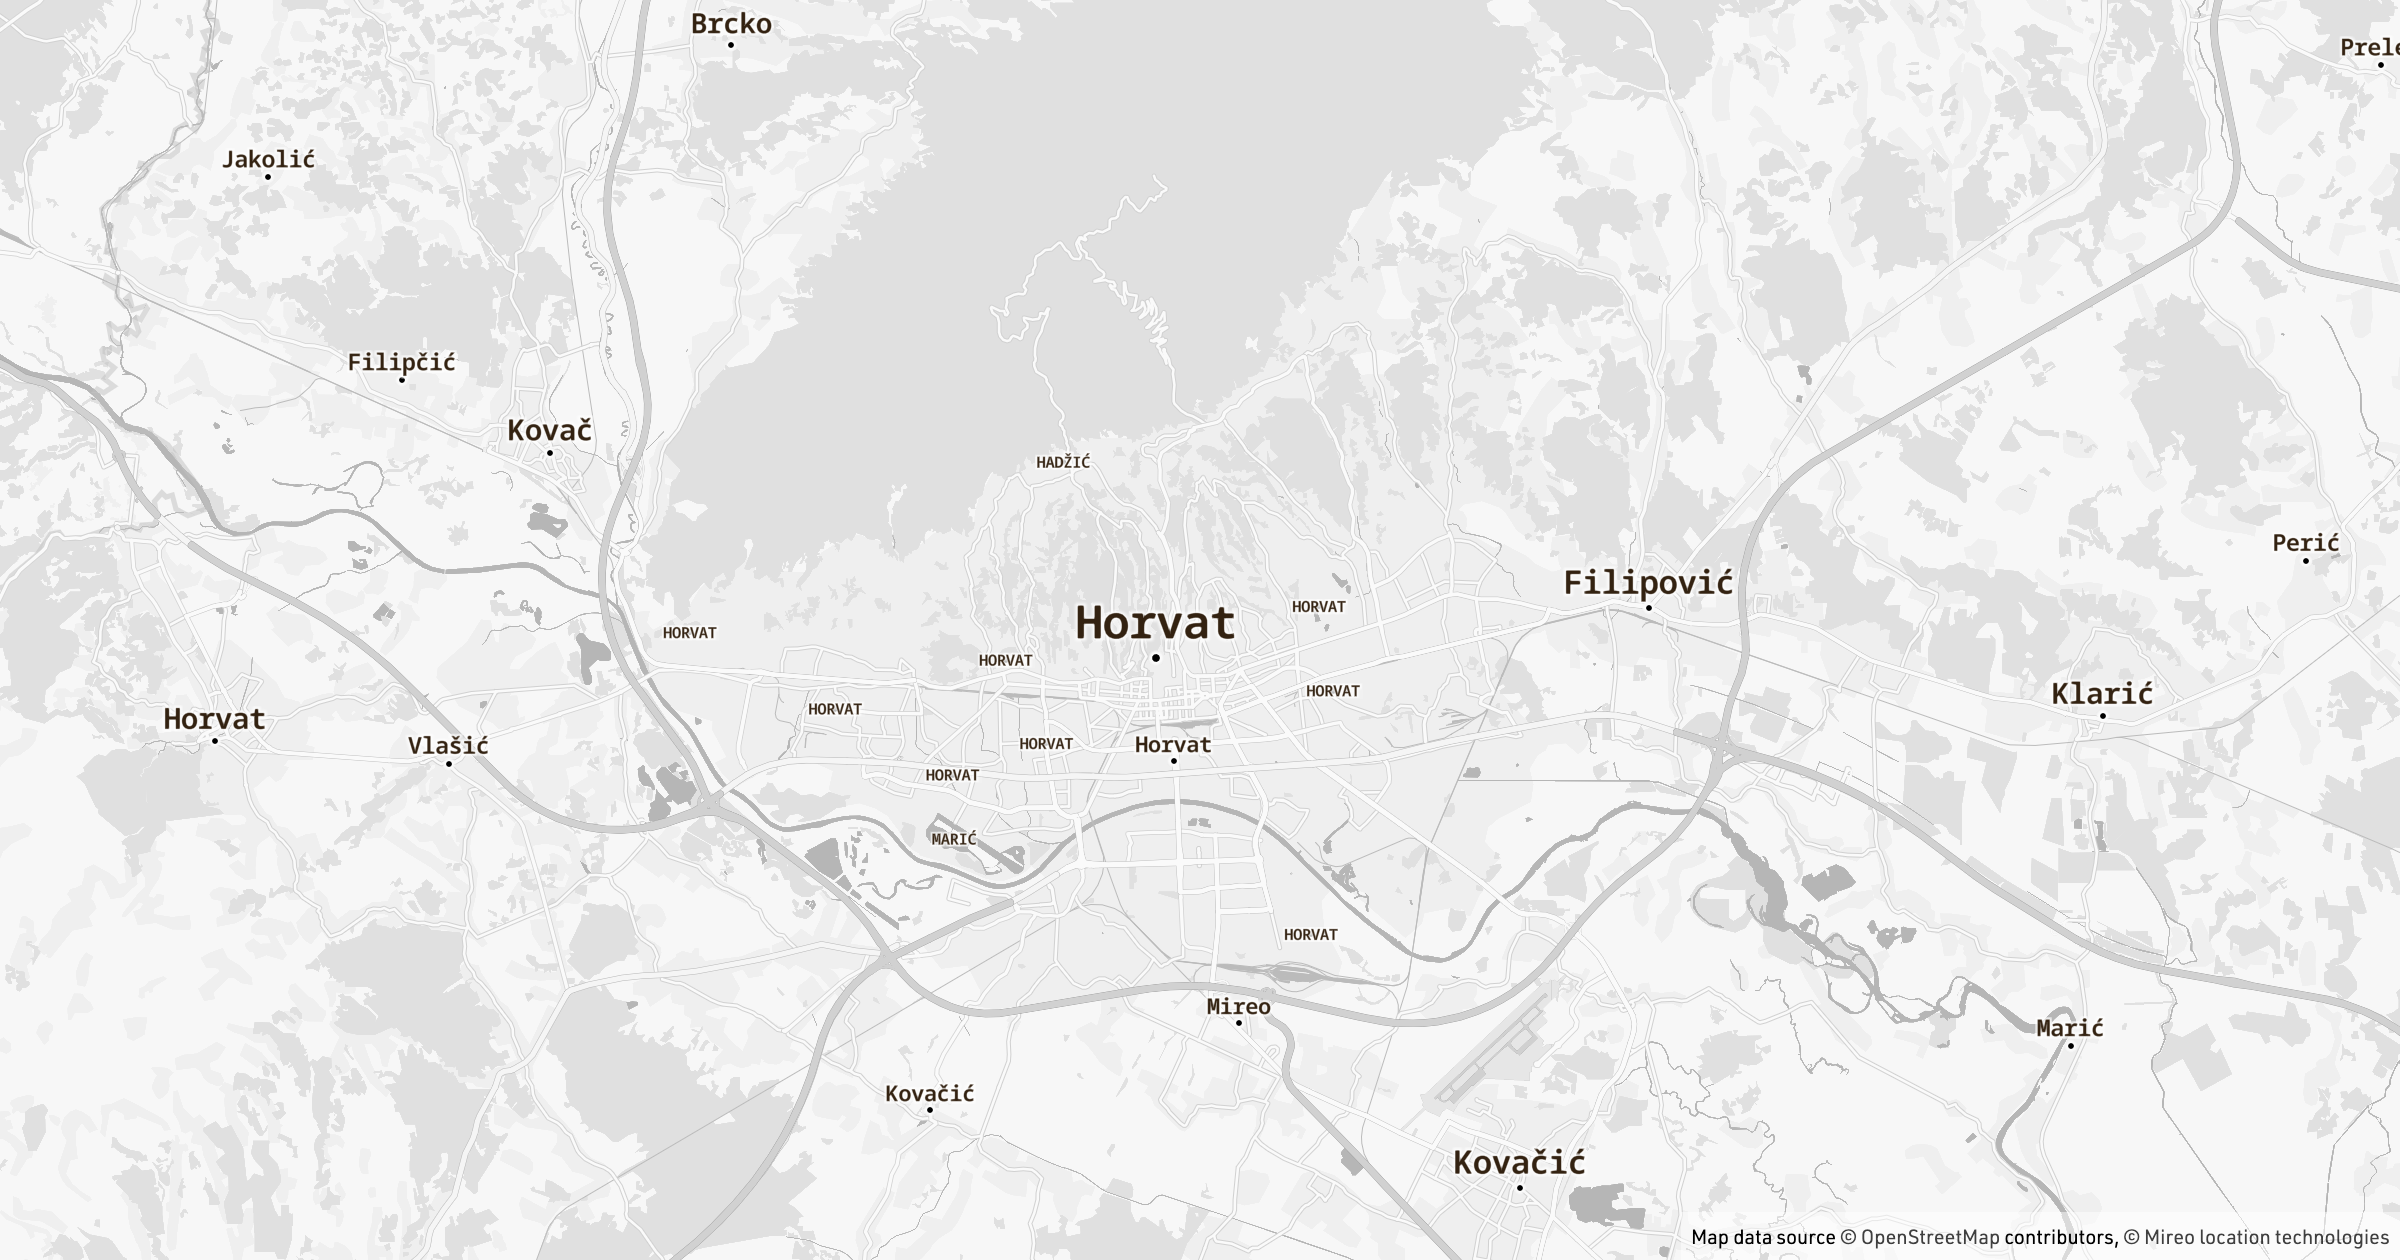 Croatian cities mapped by the most common surnames